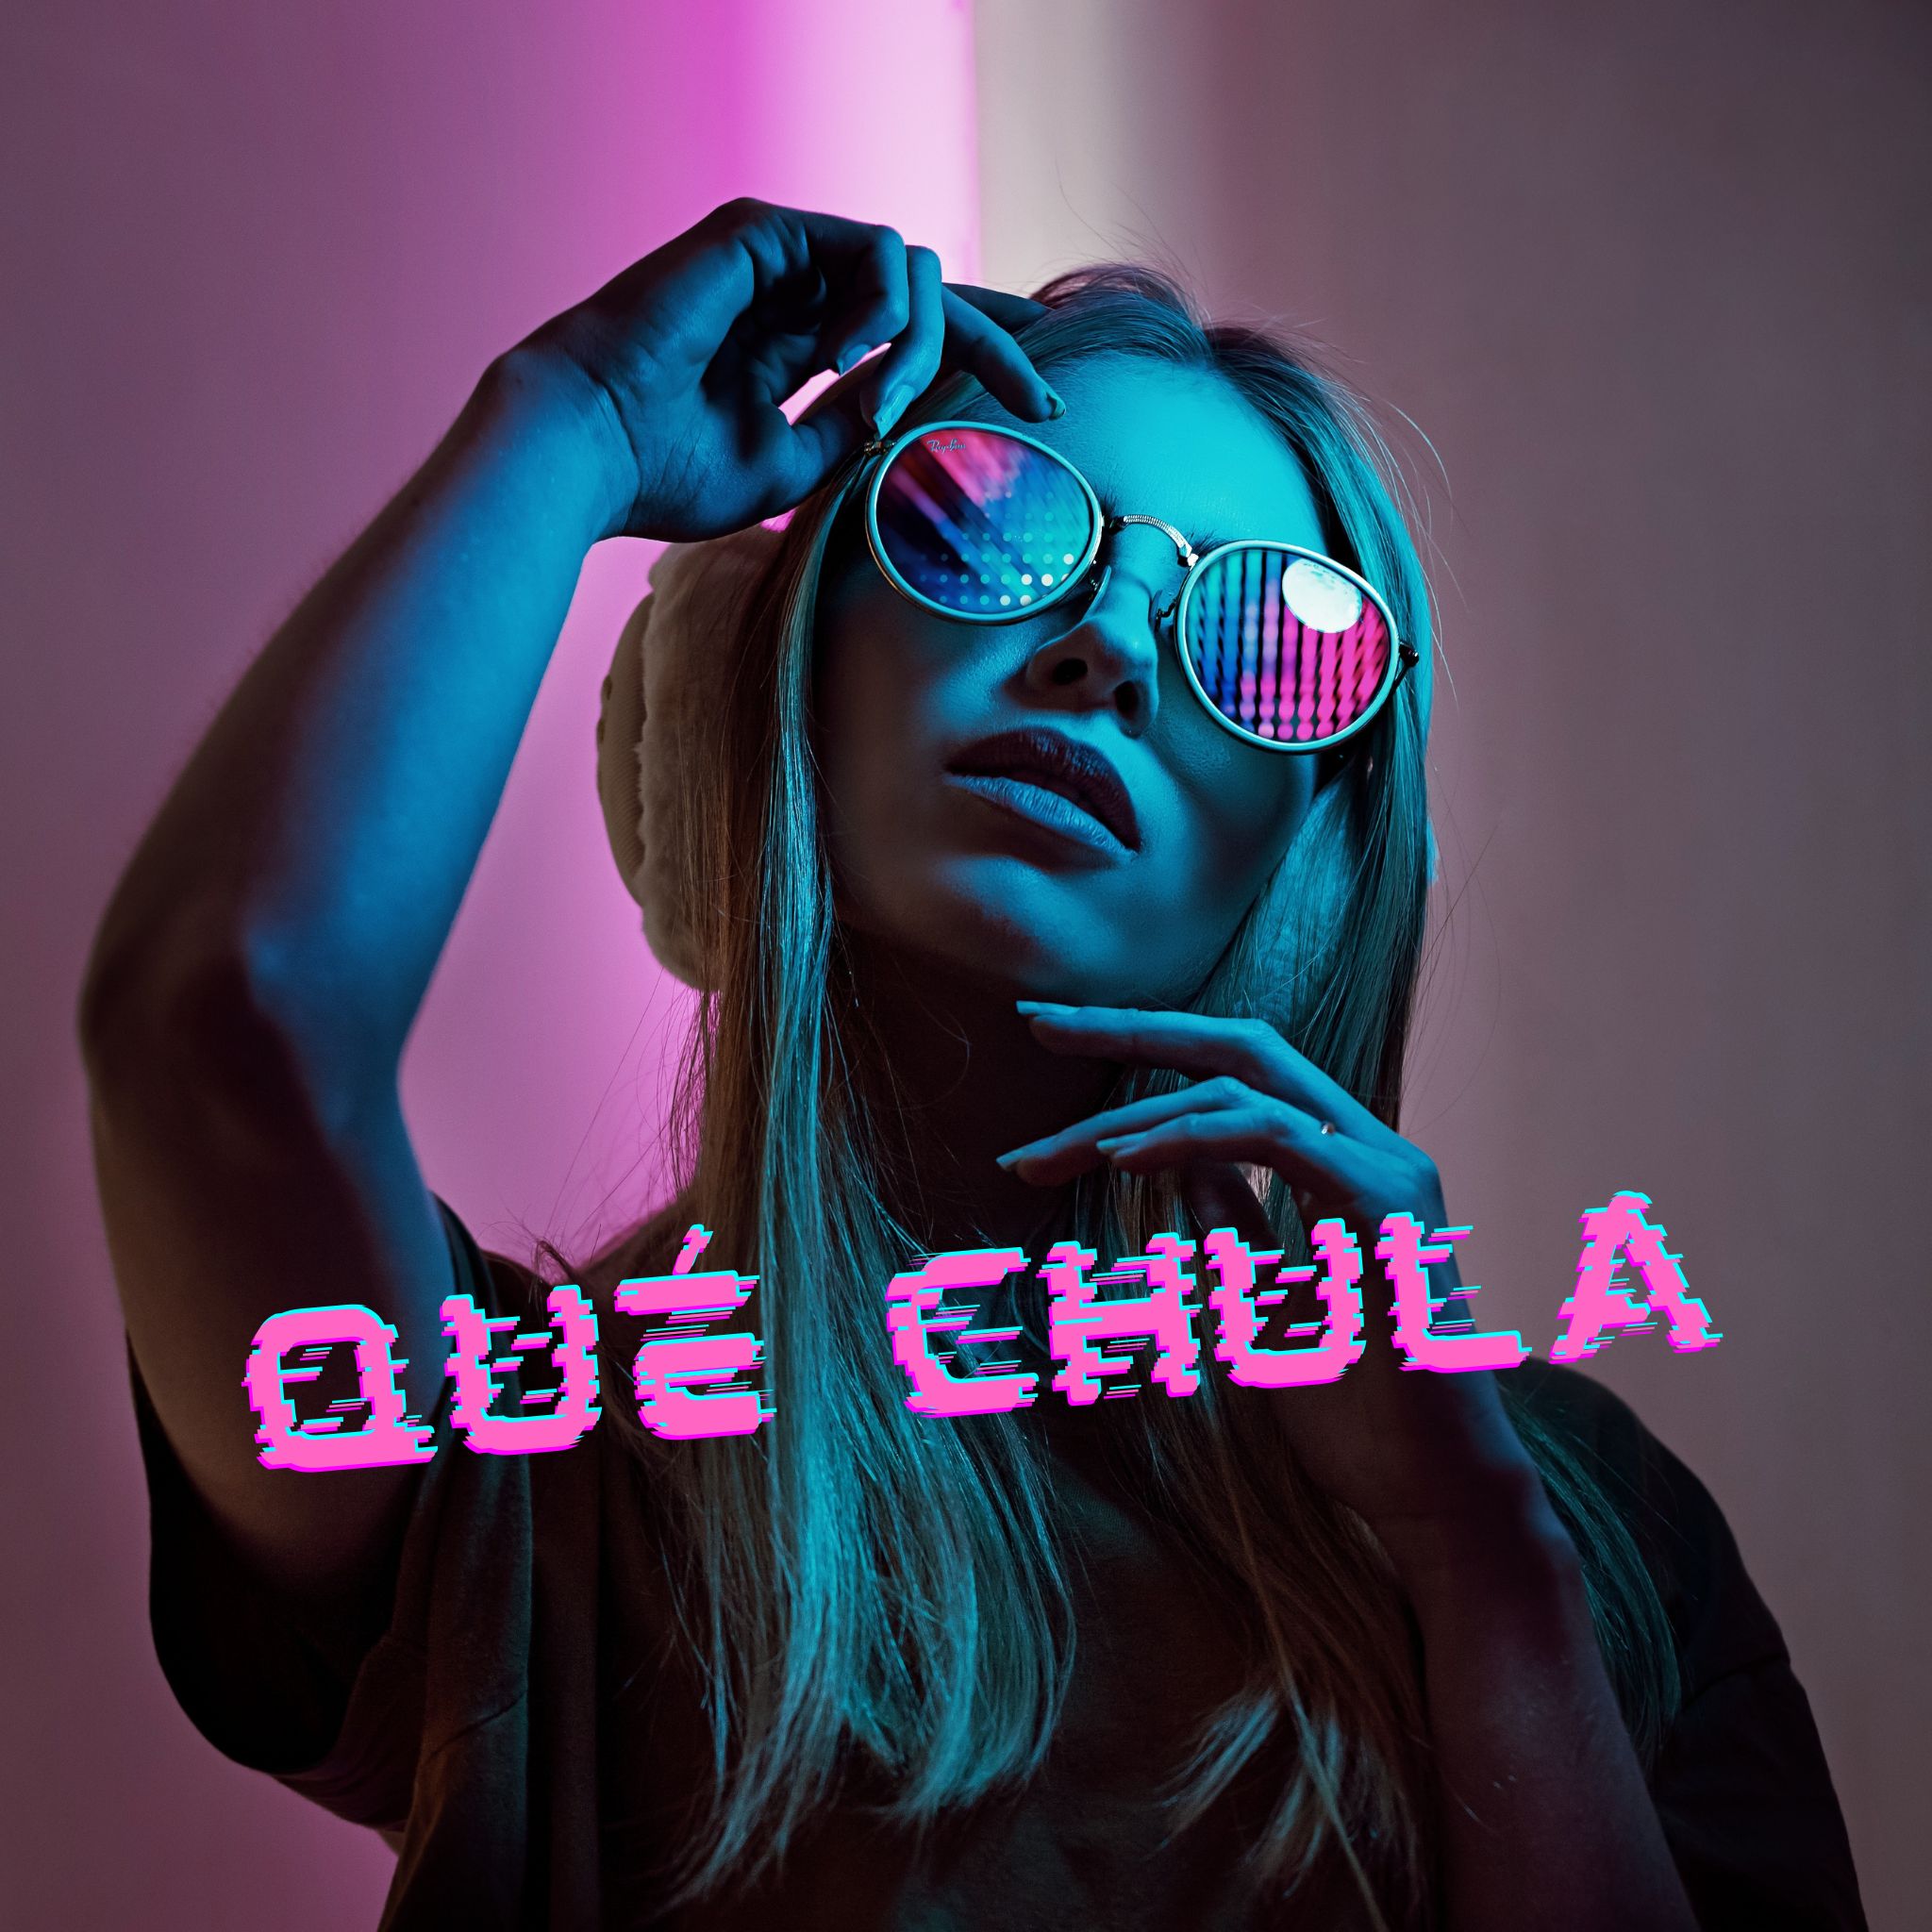 Qué chula meaning